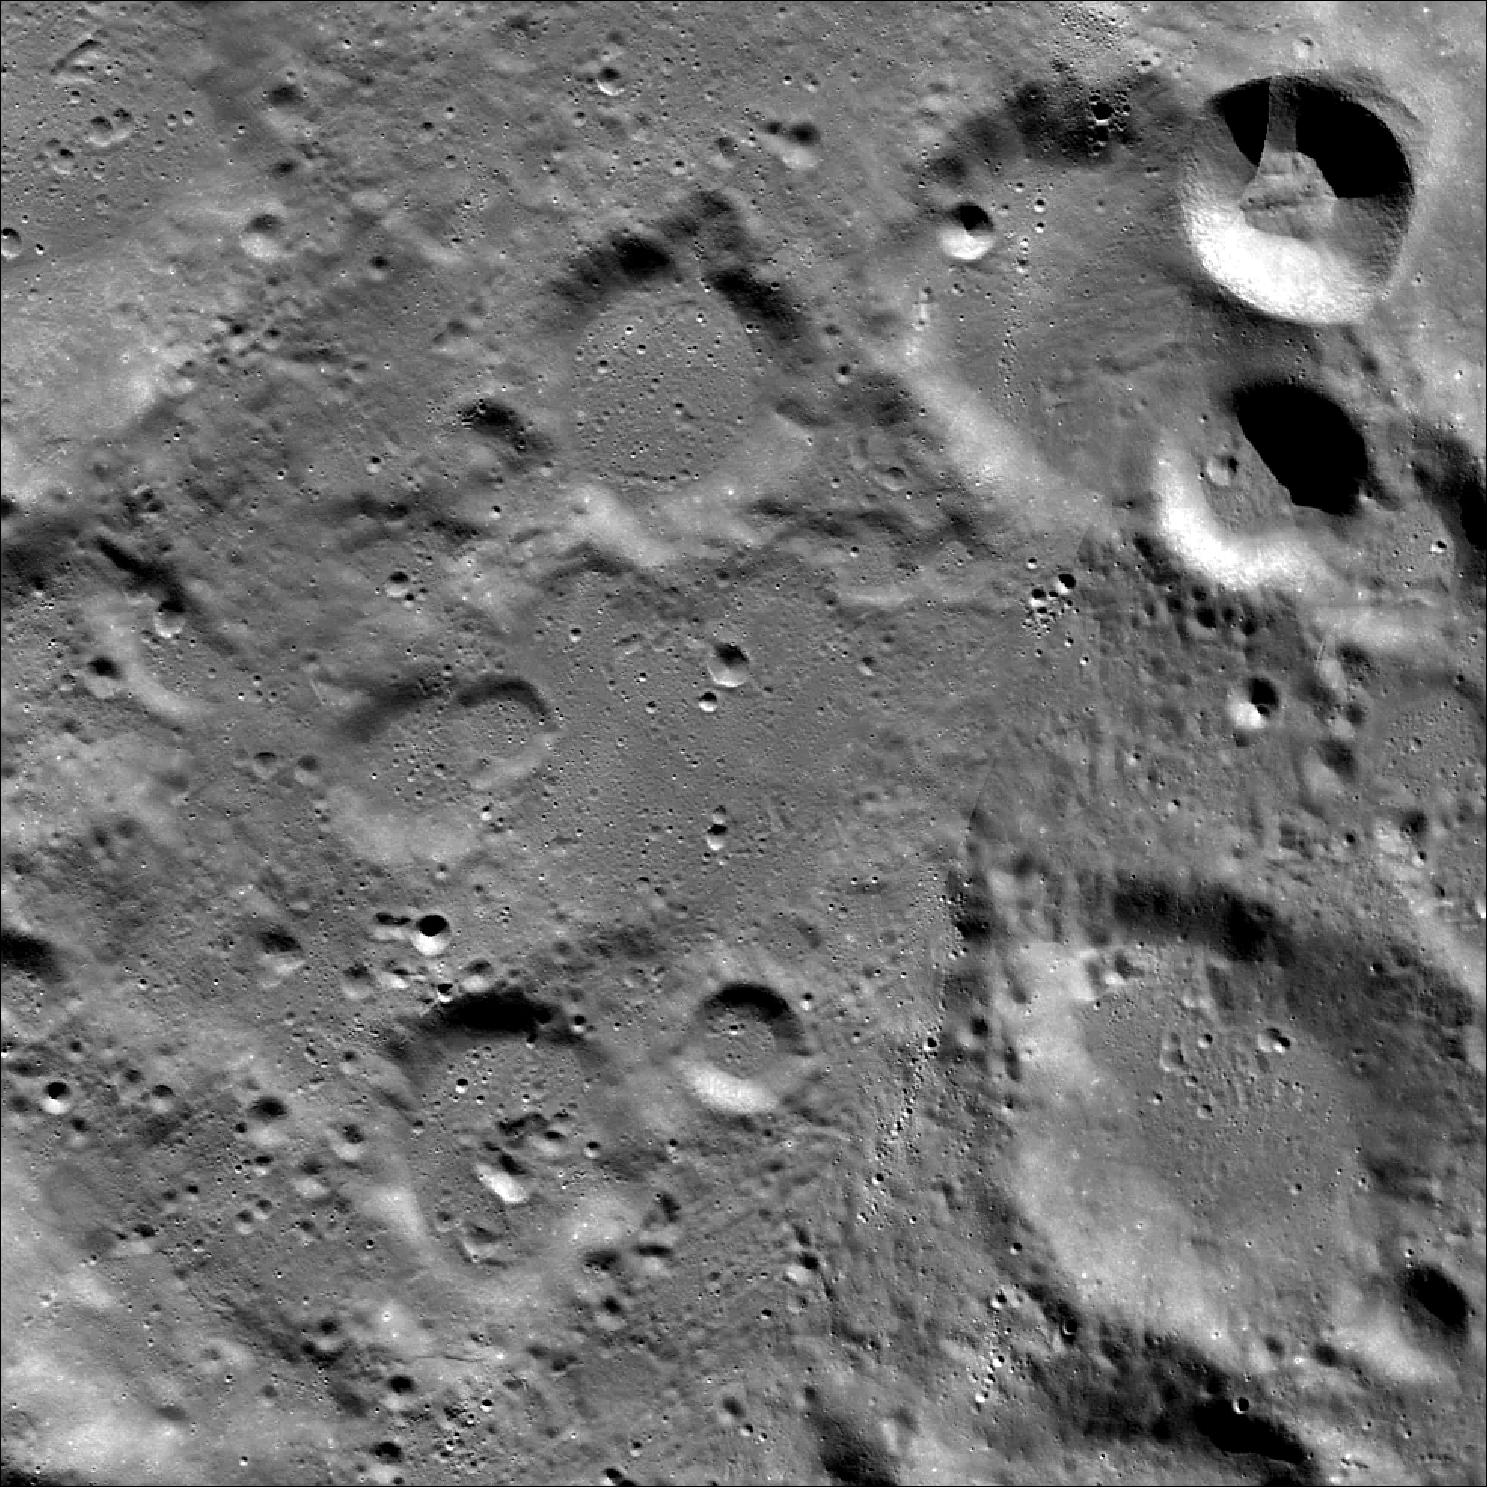 Figure 19: A view looking down on the Vikram landing site, this image acquired before the landing attempt (image credit: NASA/Goddard/Arizona State University)